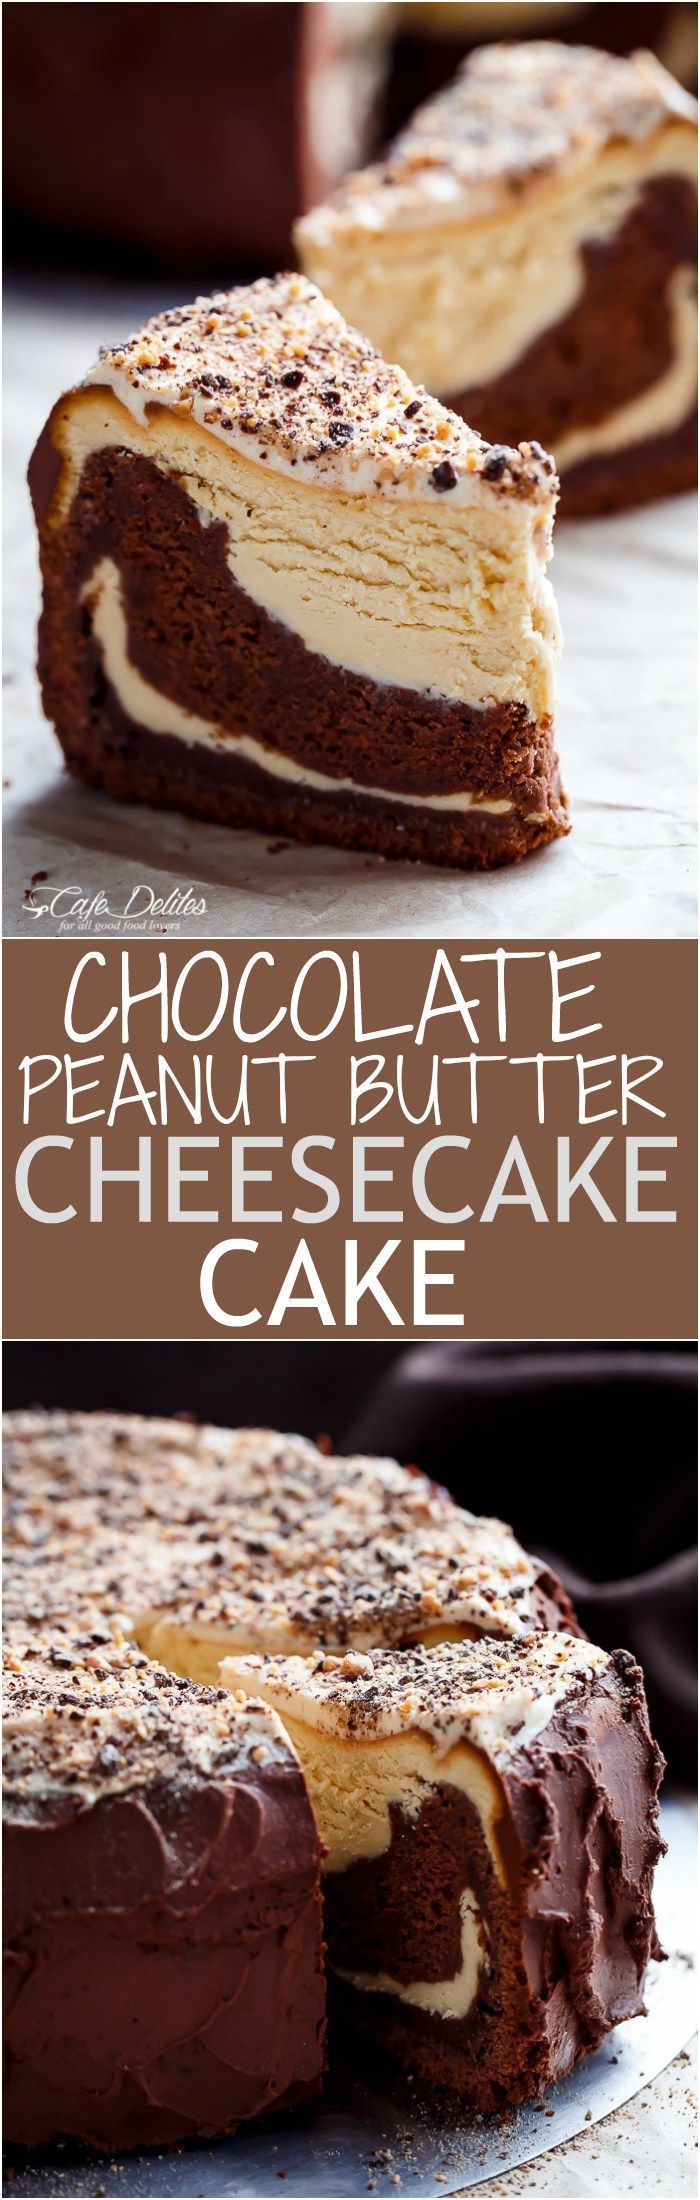 Chocolate Peanut Butter Cheesecake Cake made in the ONE pan! Creamy peanut butter cheesecake bakes on top of a fudgy chocolate